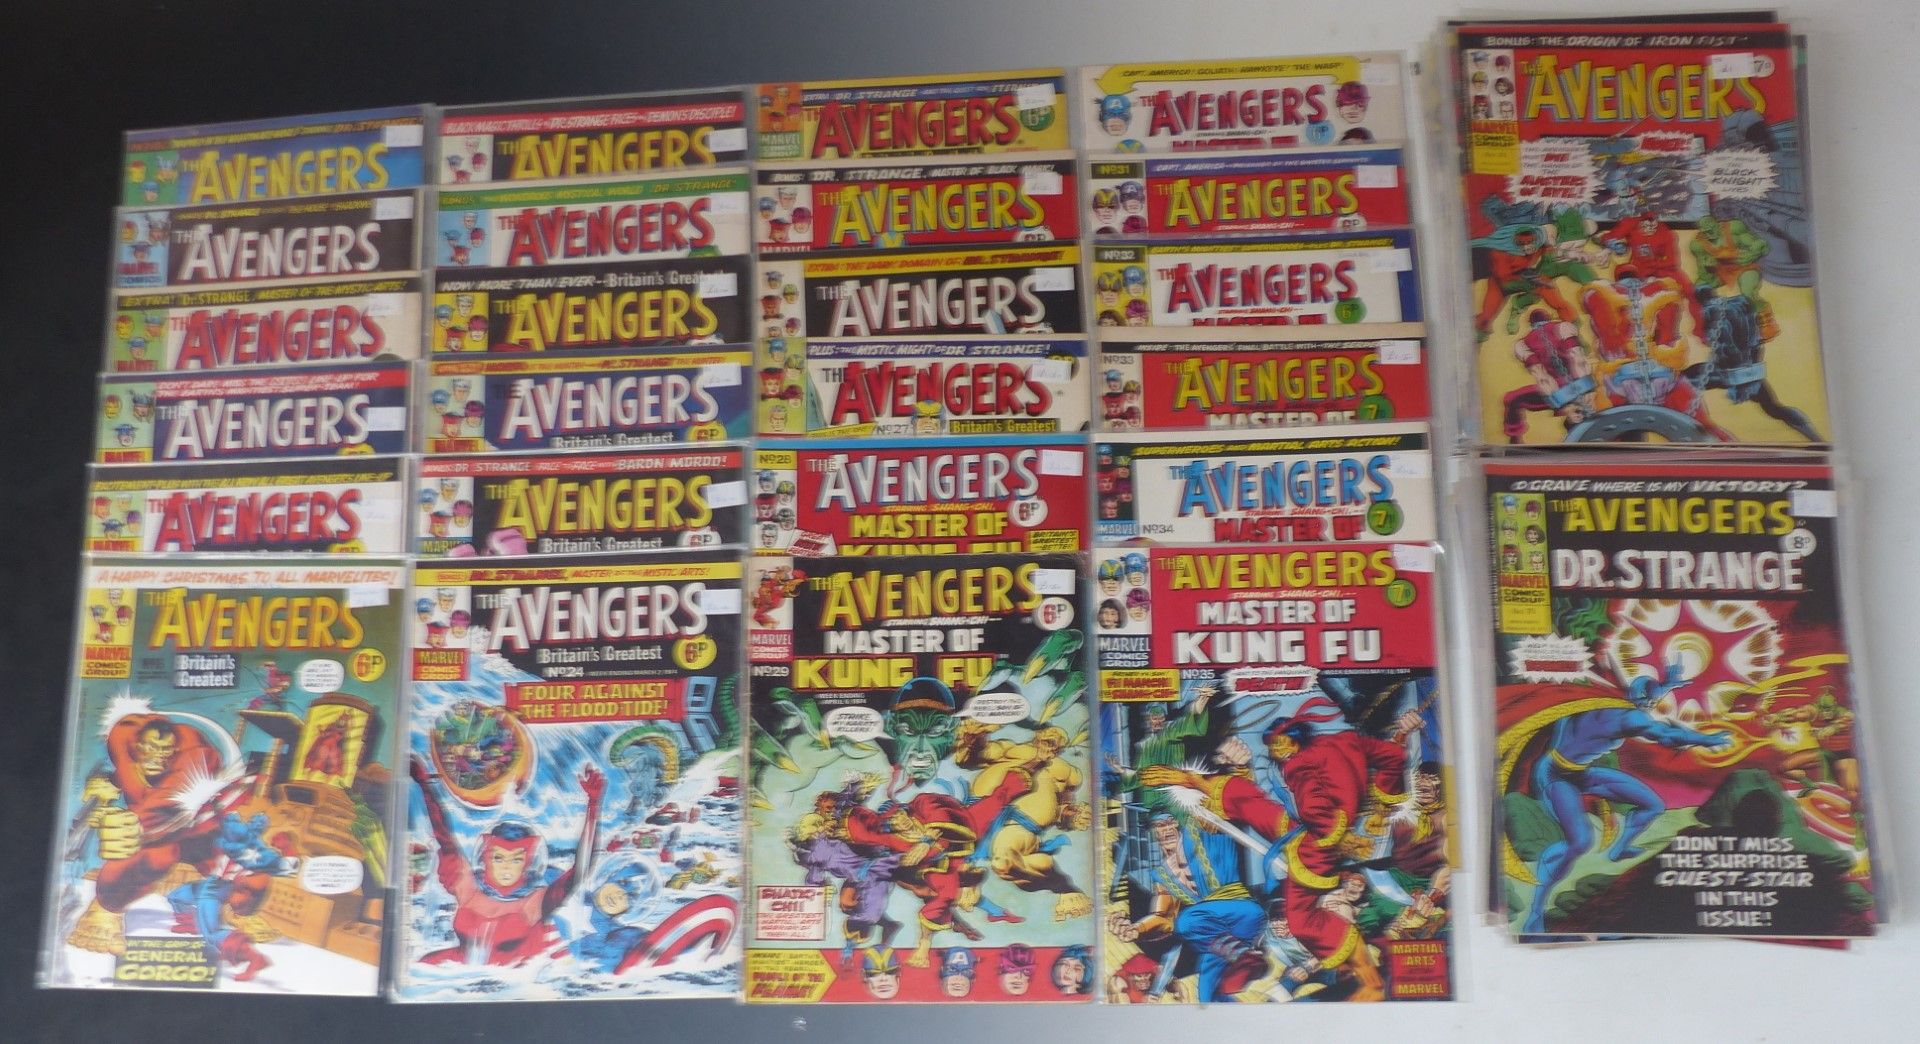 Approximately 100 Marvel The Avengers comics dating from 1973-1976.